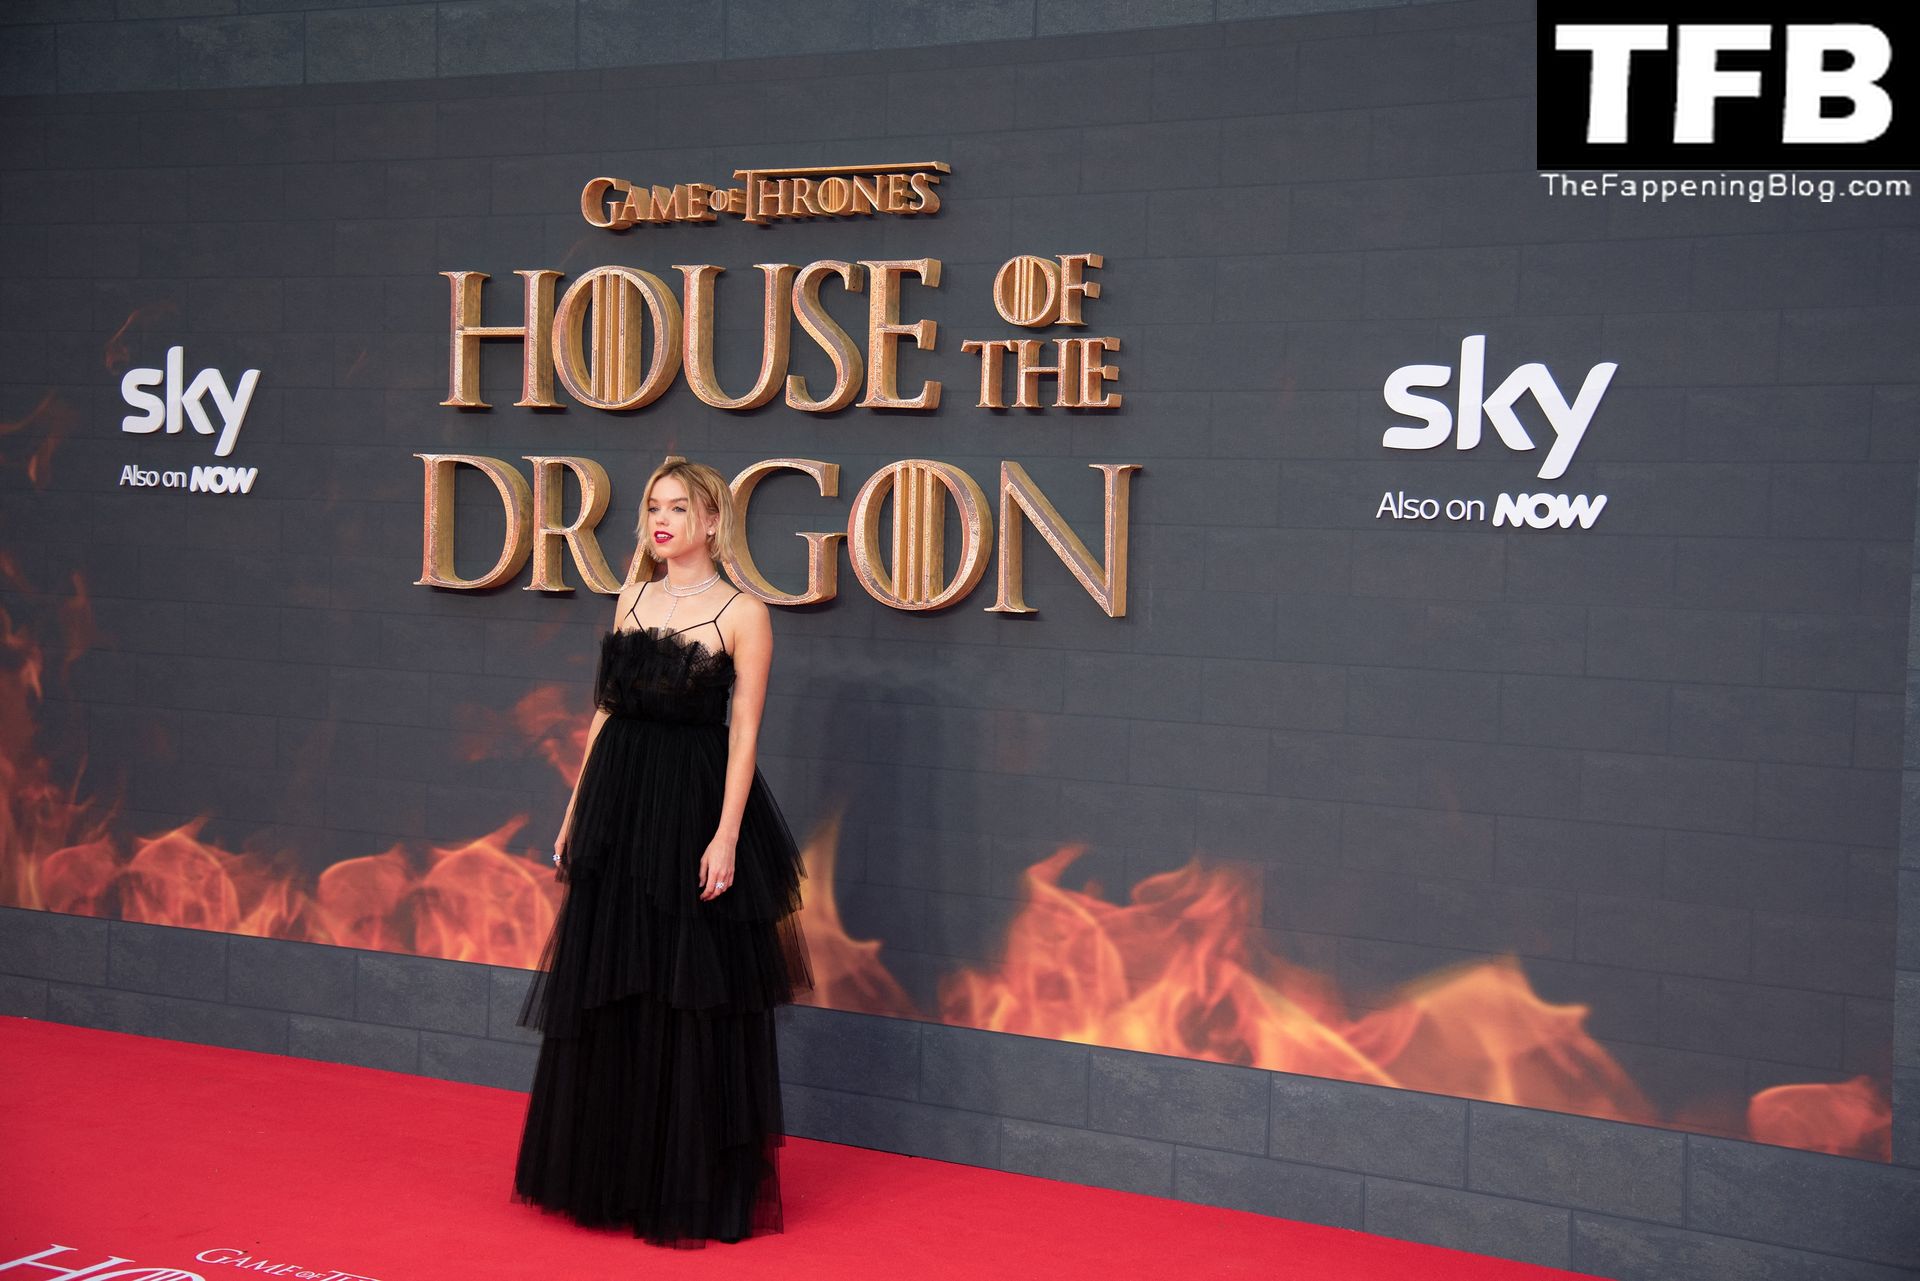 Milly Alcock Sexy The Fappening Blog 21 1 - Milly Alcock Poses in a Black Dress at the HBO’s “House of the Dragon” Premiere in London (23 Photos)